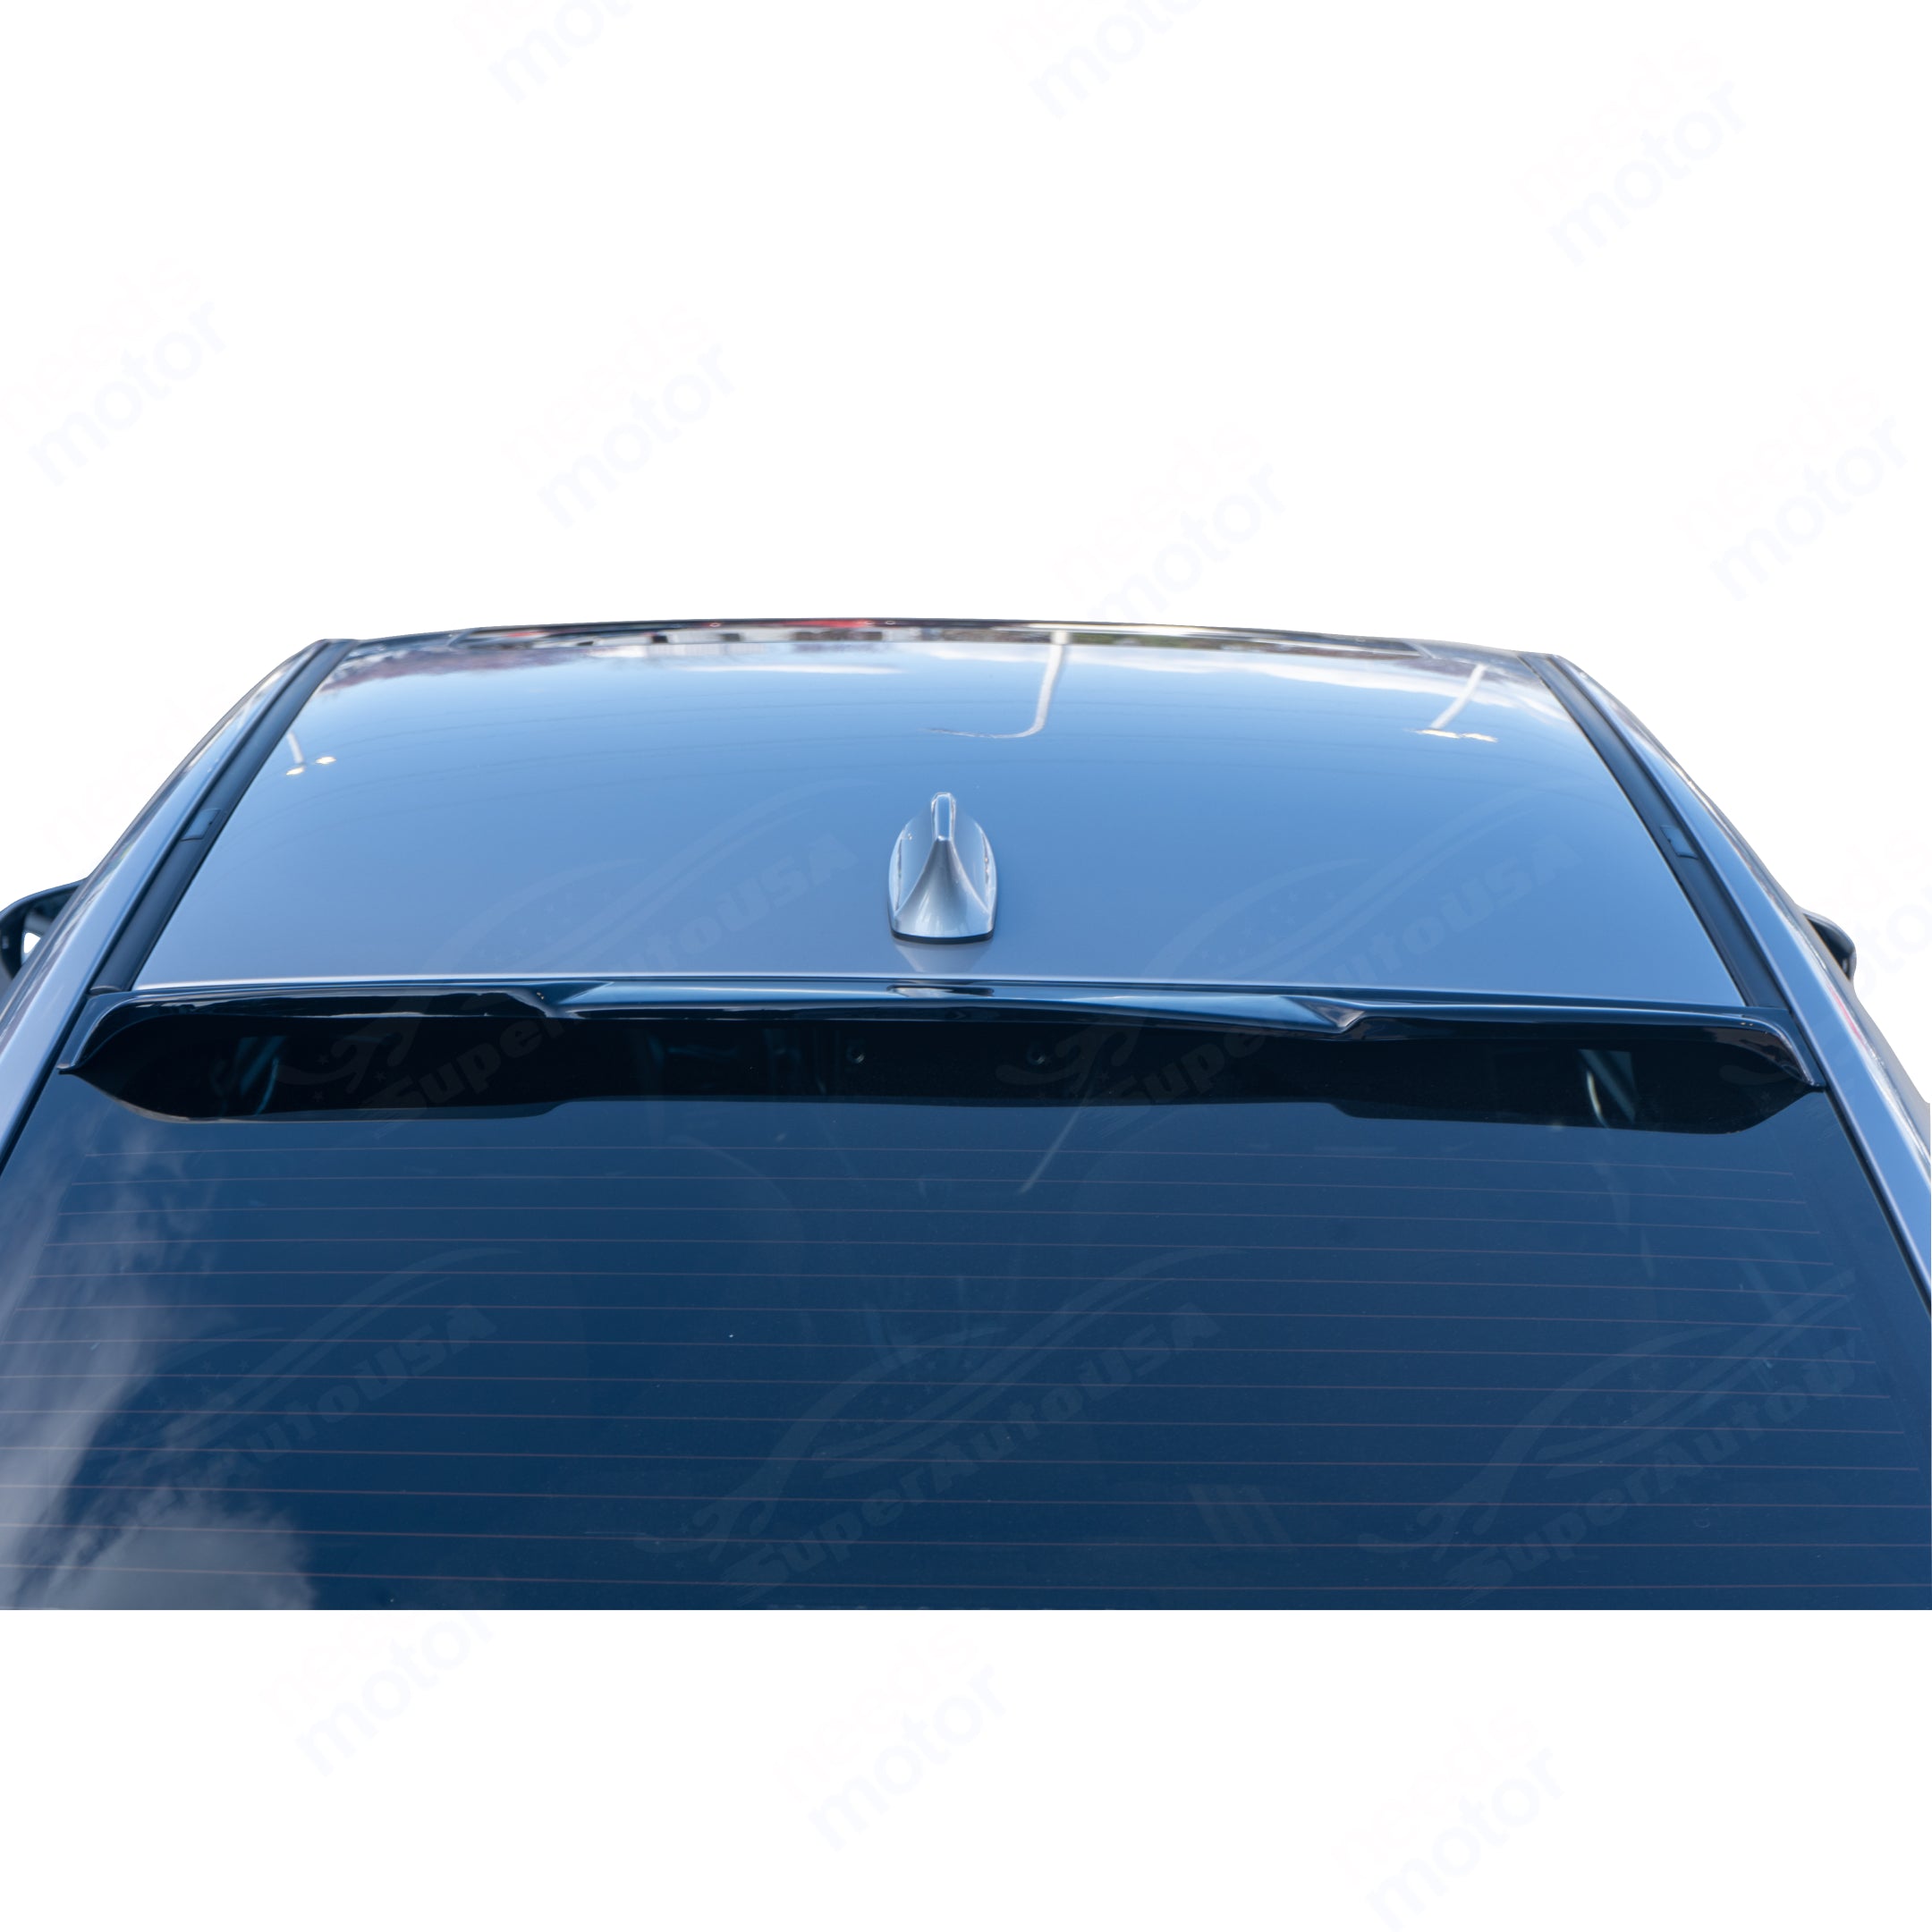 Fits 2015-2020 Acura TLX Carbon Trim Window Vent Visors & Rear Roof Spoiler